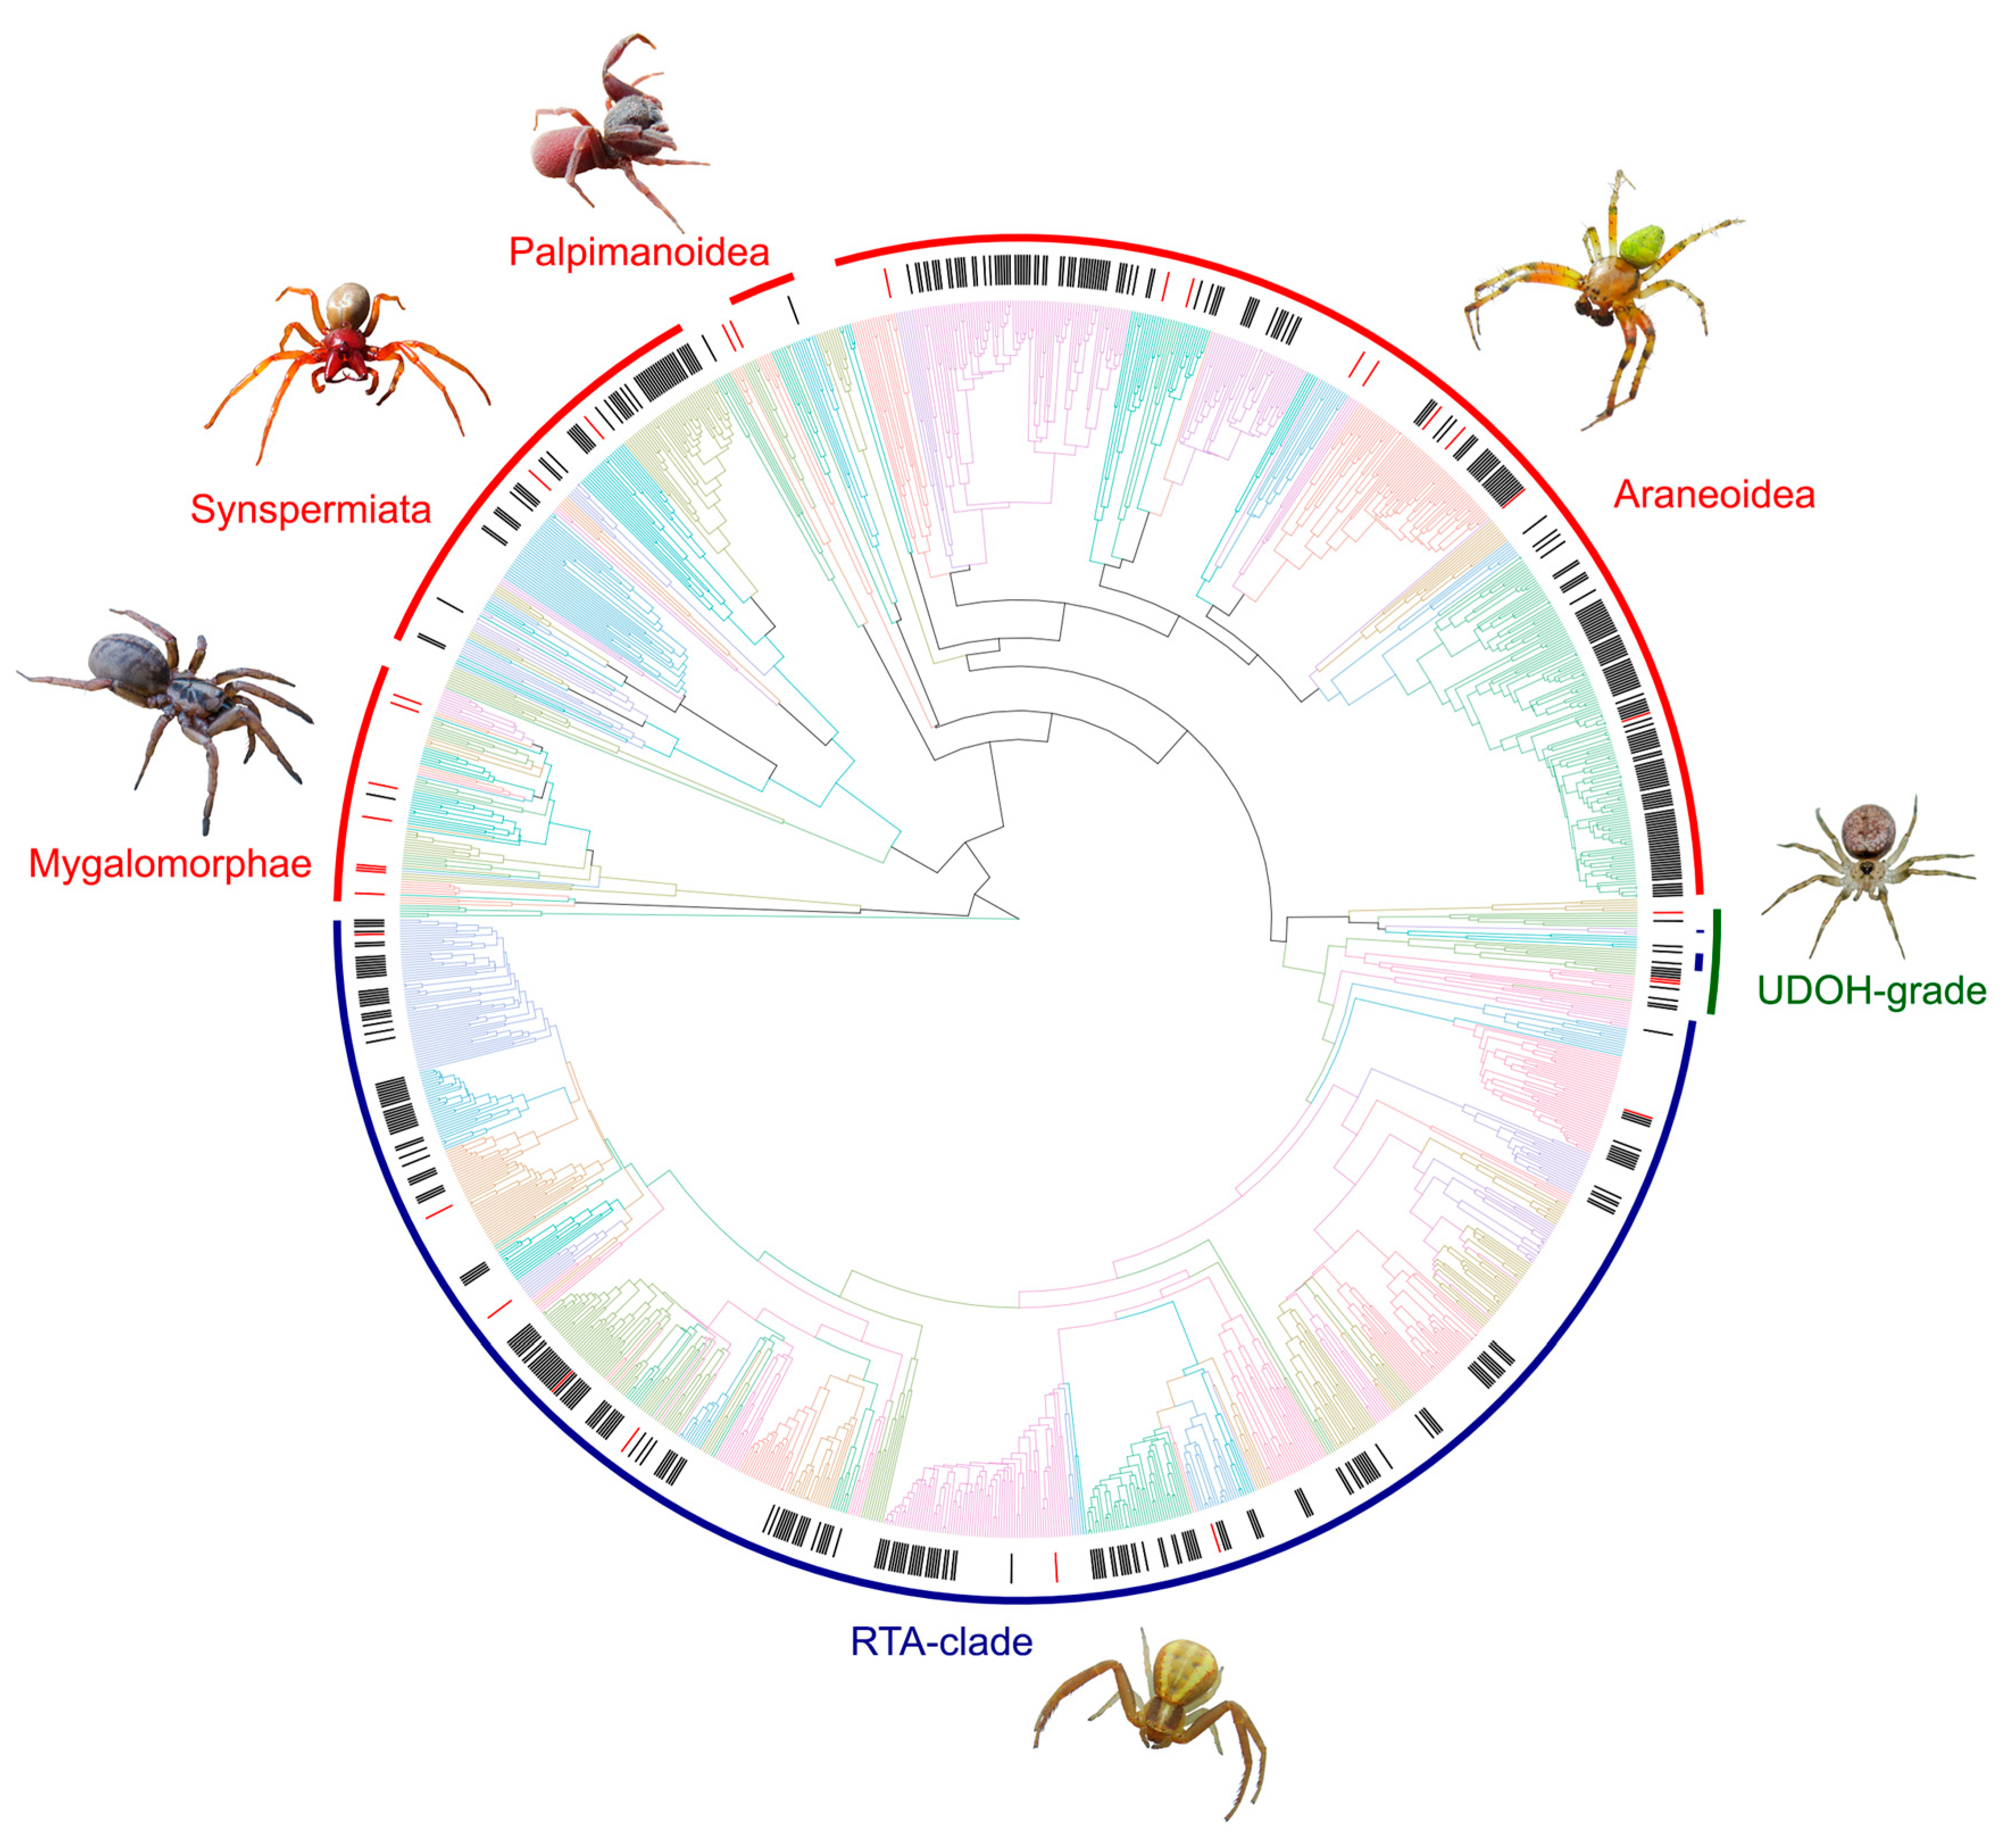 Spider phylosymbiosis: divergence of widow spider species and their  tissues' microbiomes, BMC Ecology and Evolution